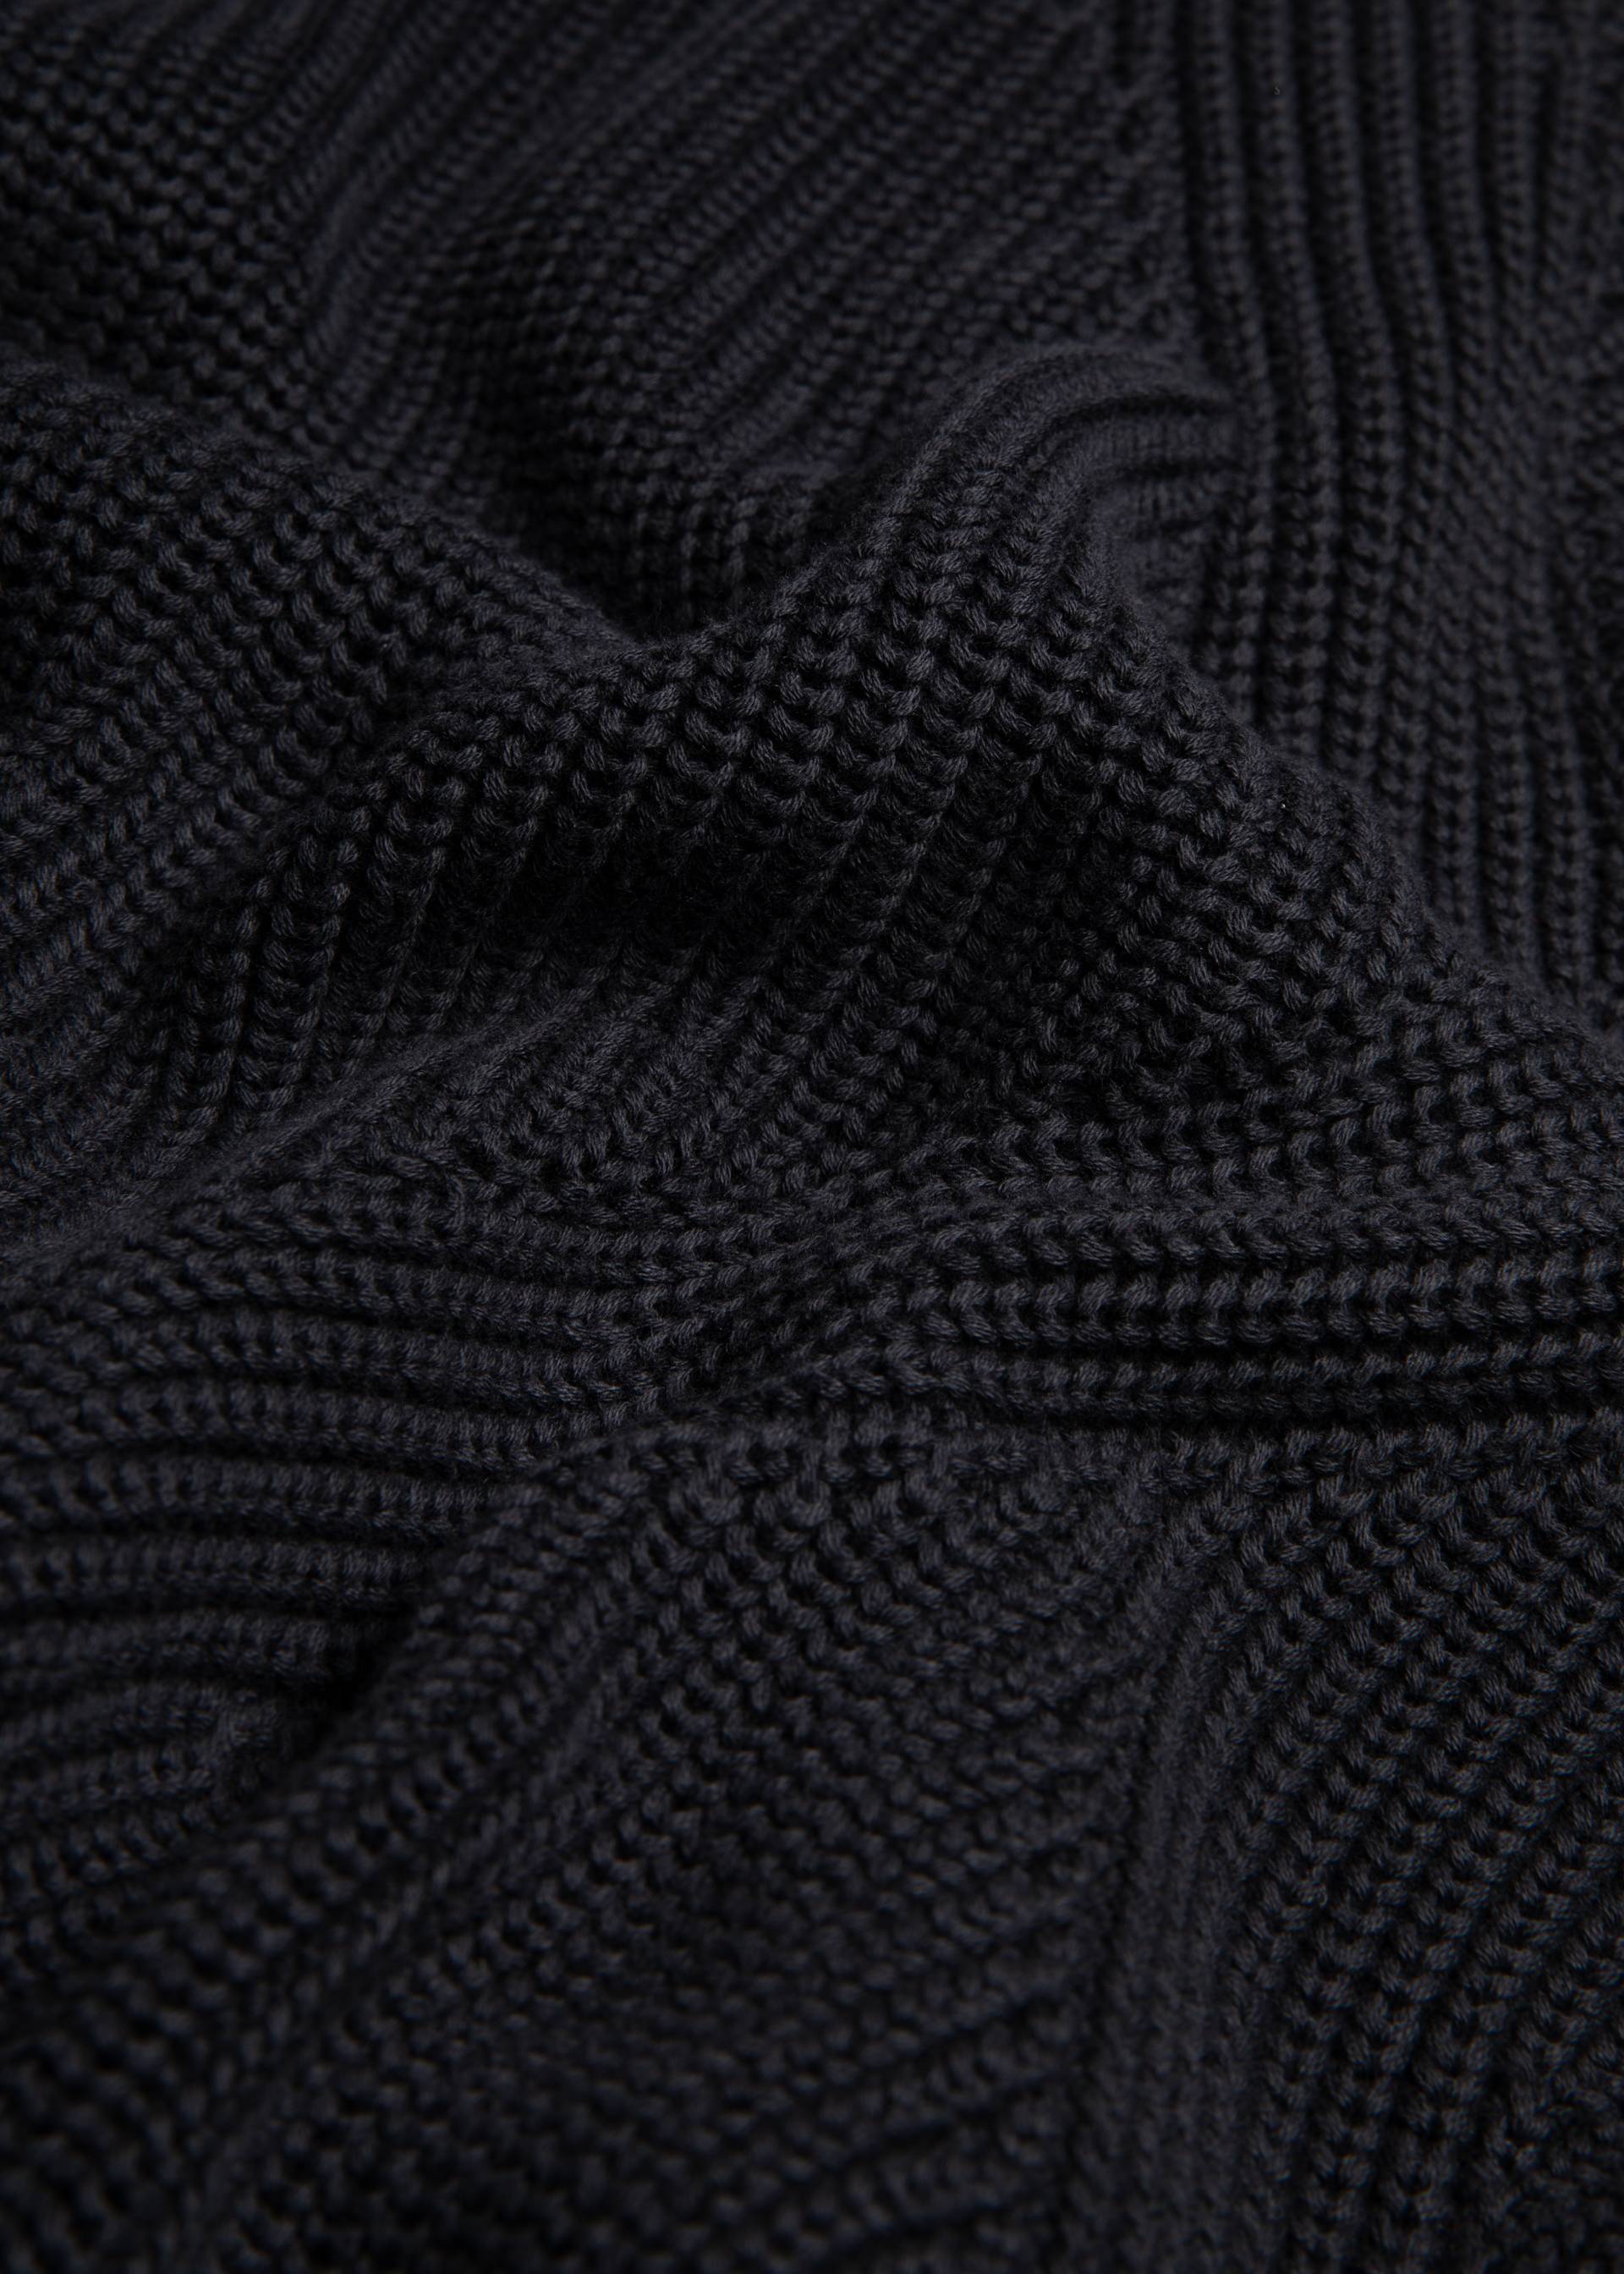 Knitted Jumper Highway to Heaven, royal new black, Knitted Jumpers & Cardigans, Black